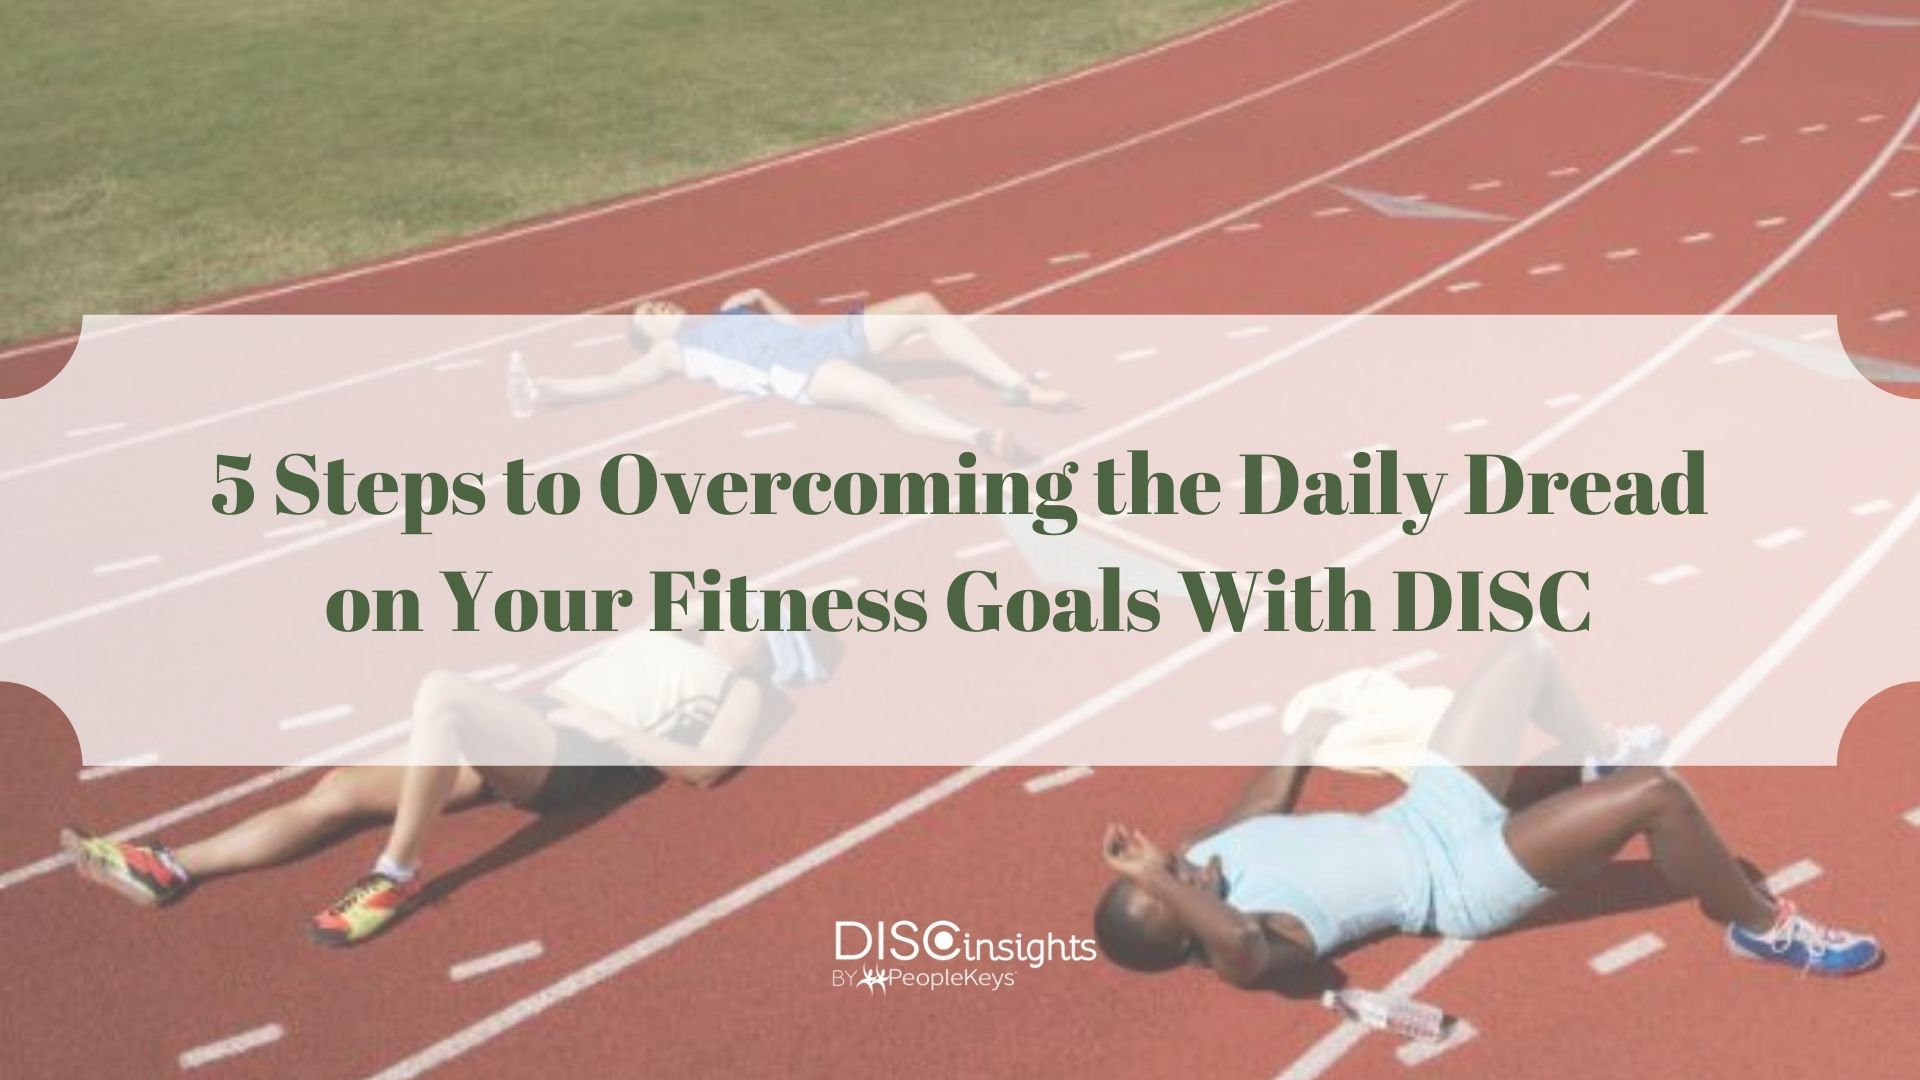 5 Steps to Overcoming the Daily Dread on Your Fitness Goals With DISC